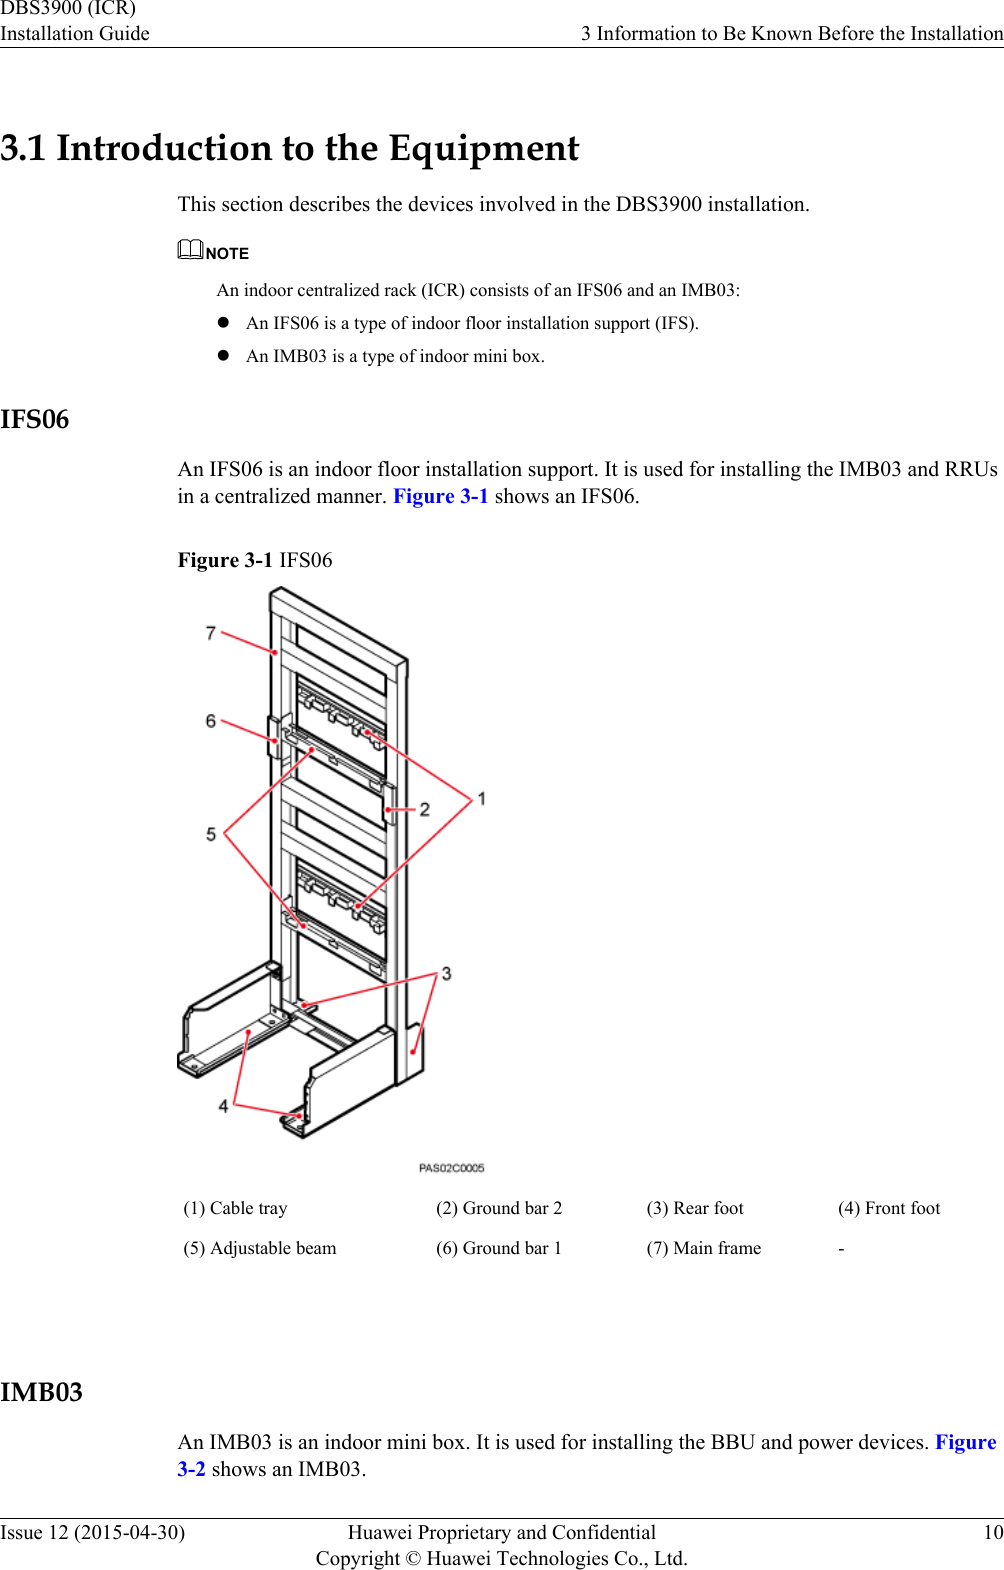 3.1 Introduction to the EquipmentThis section describes the devices involved in the DBS3900 installation.NOTEAn indoor centralized rack (ICR) consists of an IFS06 and an IMB03:lAn IFS06 is a type of indoor floor installation support (IFS).lAn IMB03 is a type of indoor mini box.IFS06An IFS06 is an indoor floor installation support. It is used for installing the IMB03 and RRUsin a centralized manner. Figure 3-1 shows an IFS06.Figure 3-1 IFS06(1) Cable tray (2) Ground bar 2 (3) Rear foot (4) Front foot(5) Adjustable beam (6) Ground bar 1 (7) Main frame - IMB03An IMB03 is an indoor mini box. It is used for installing the BBU and power devices. Figure3-2 shows an IMB03.DBS3900 (ICR)Installation Guide 3 Information to Be Known Before the InstallationIssue 12 (2015-04-30) Huawei Proprietary and ConfidentialCopyright © Huawei Technologies Co., Ltd.10